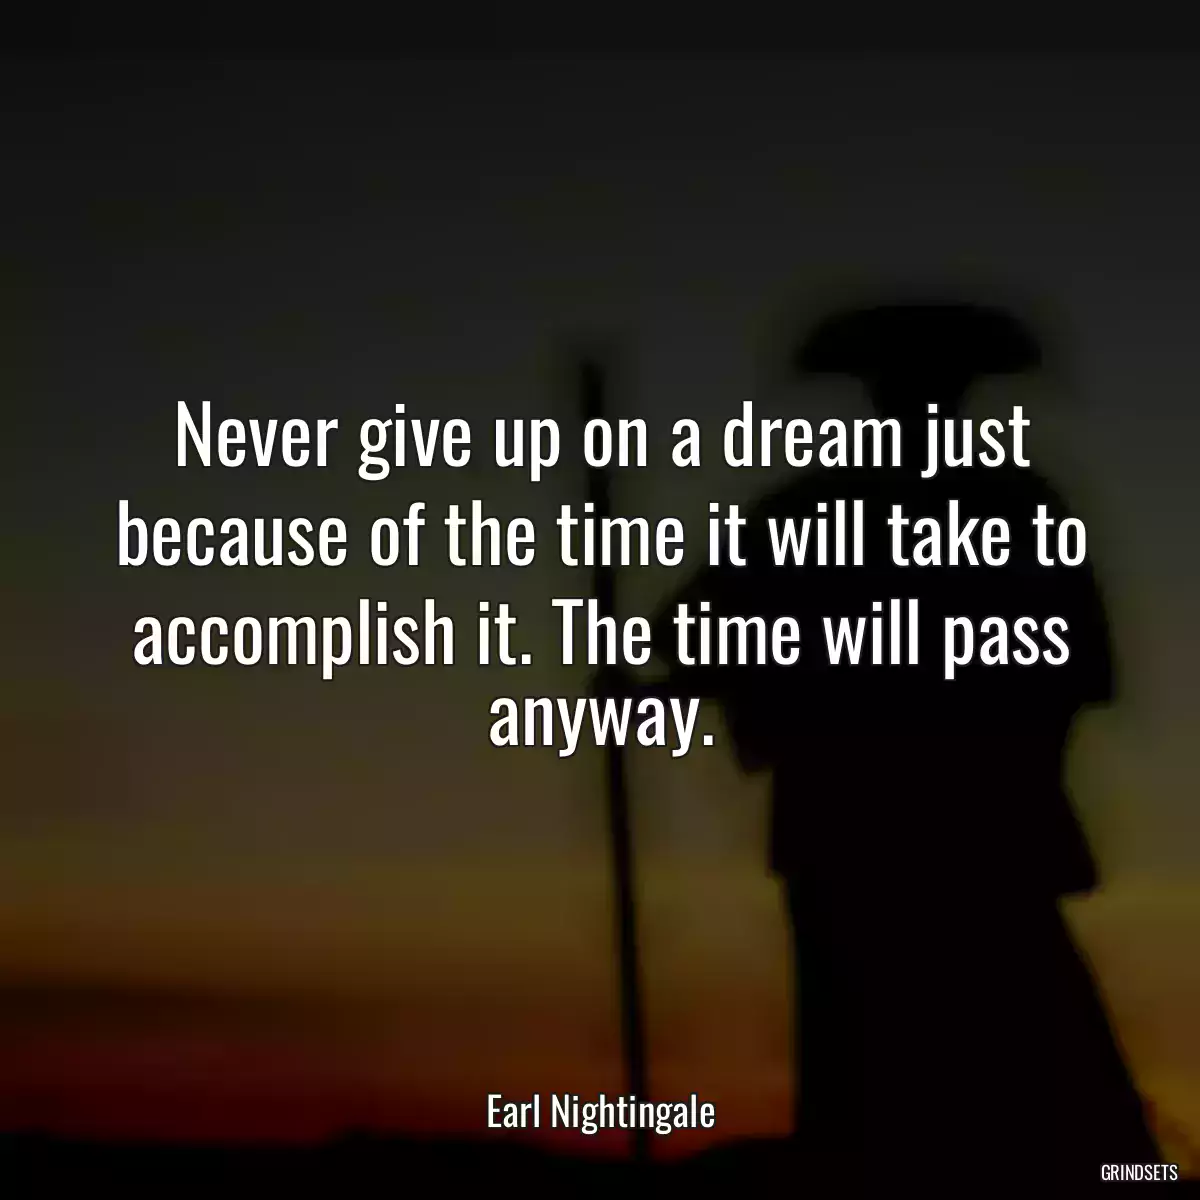 Never give up on a dream just because of the time it will take to accomplish it. The time will pass anyway.